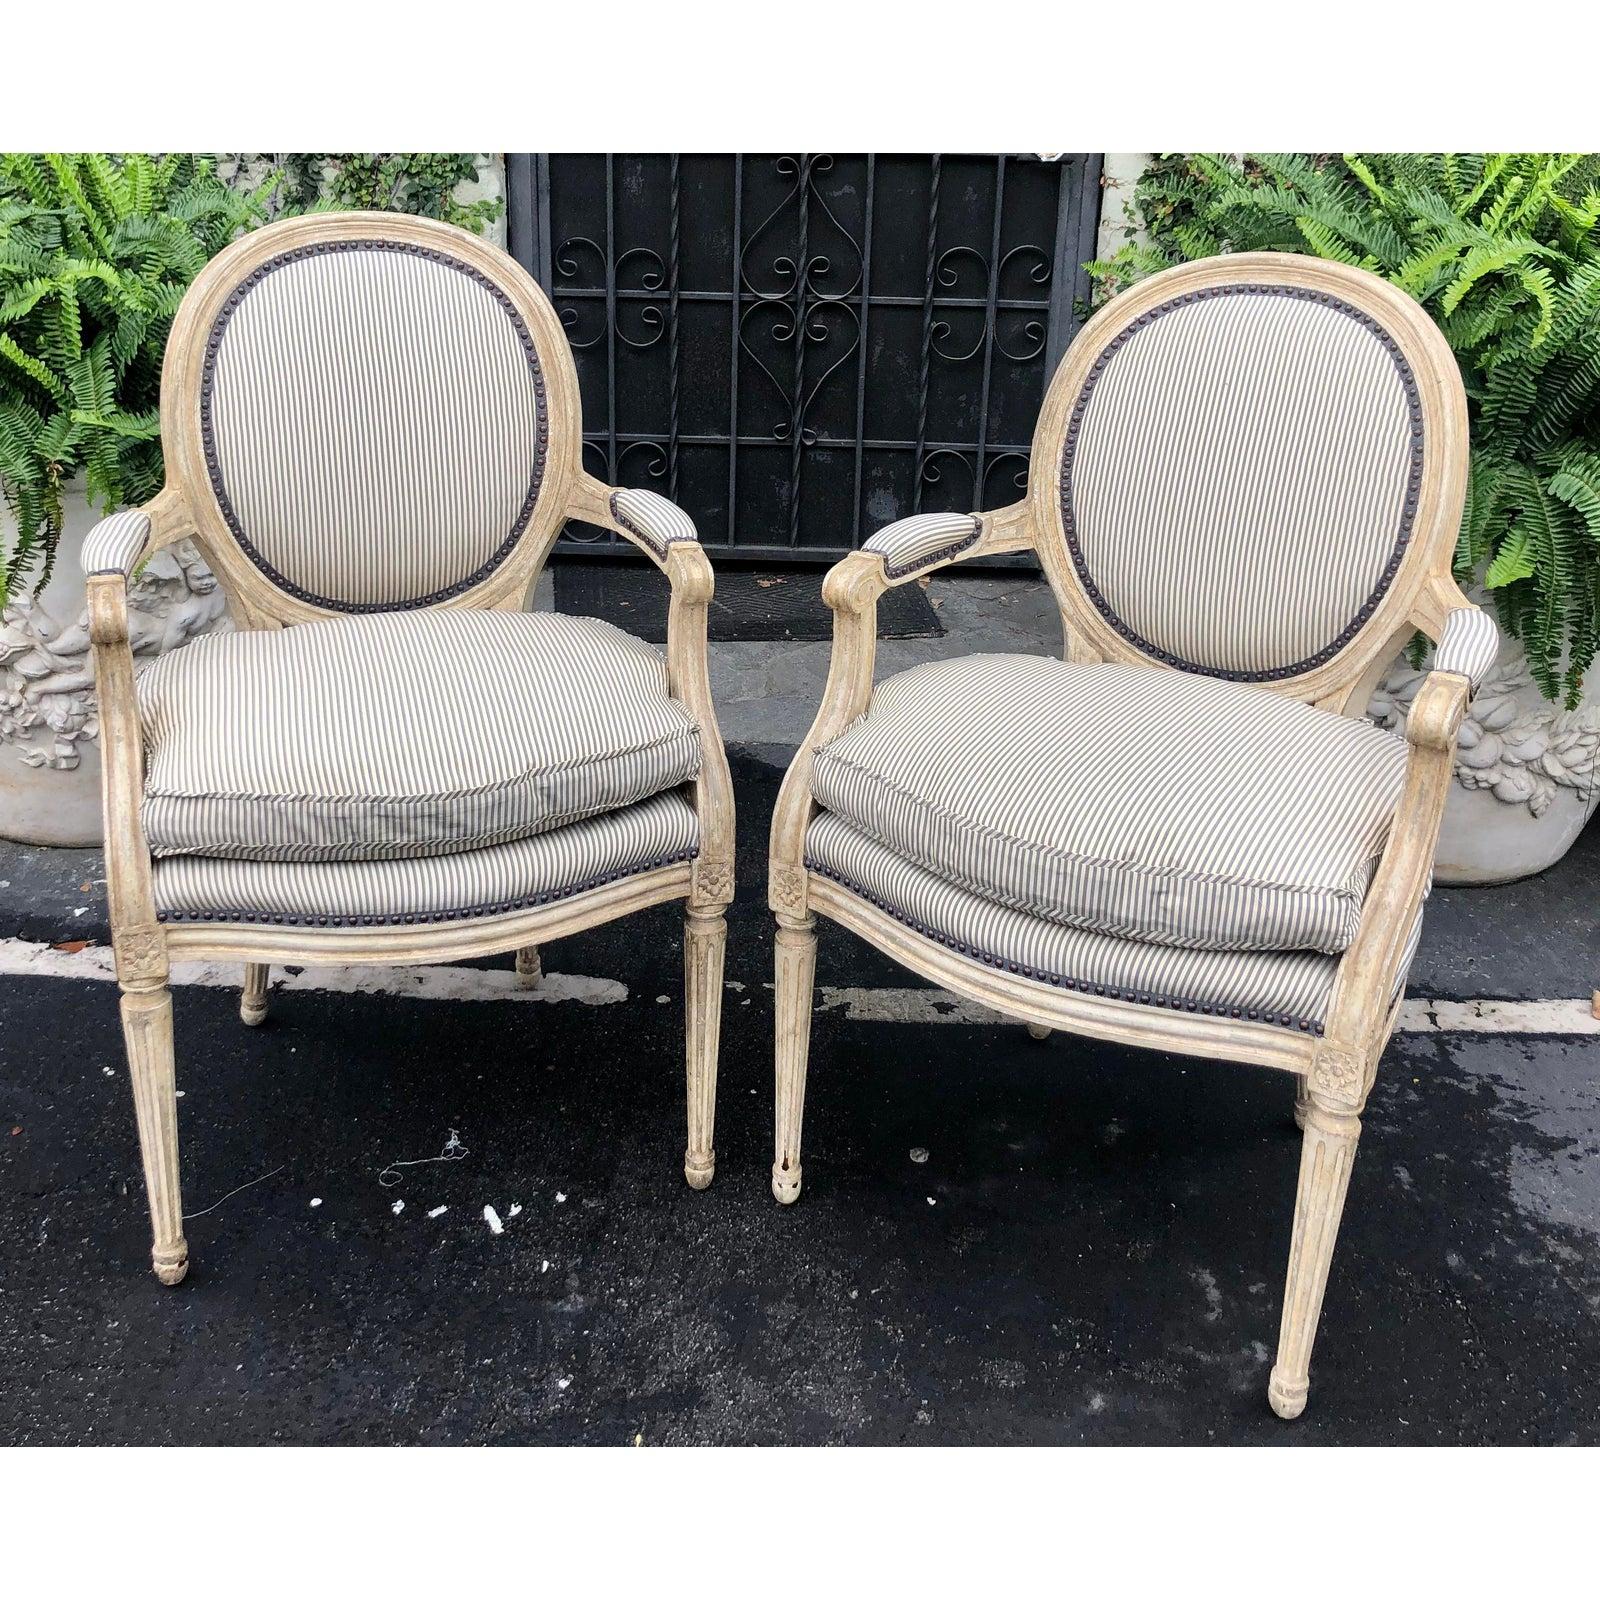 Pair of Louis XV style balloon back armchairs with silk down cushions.